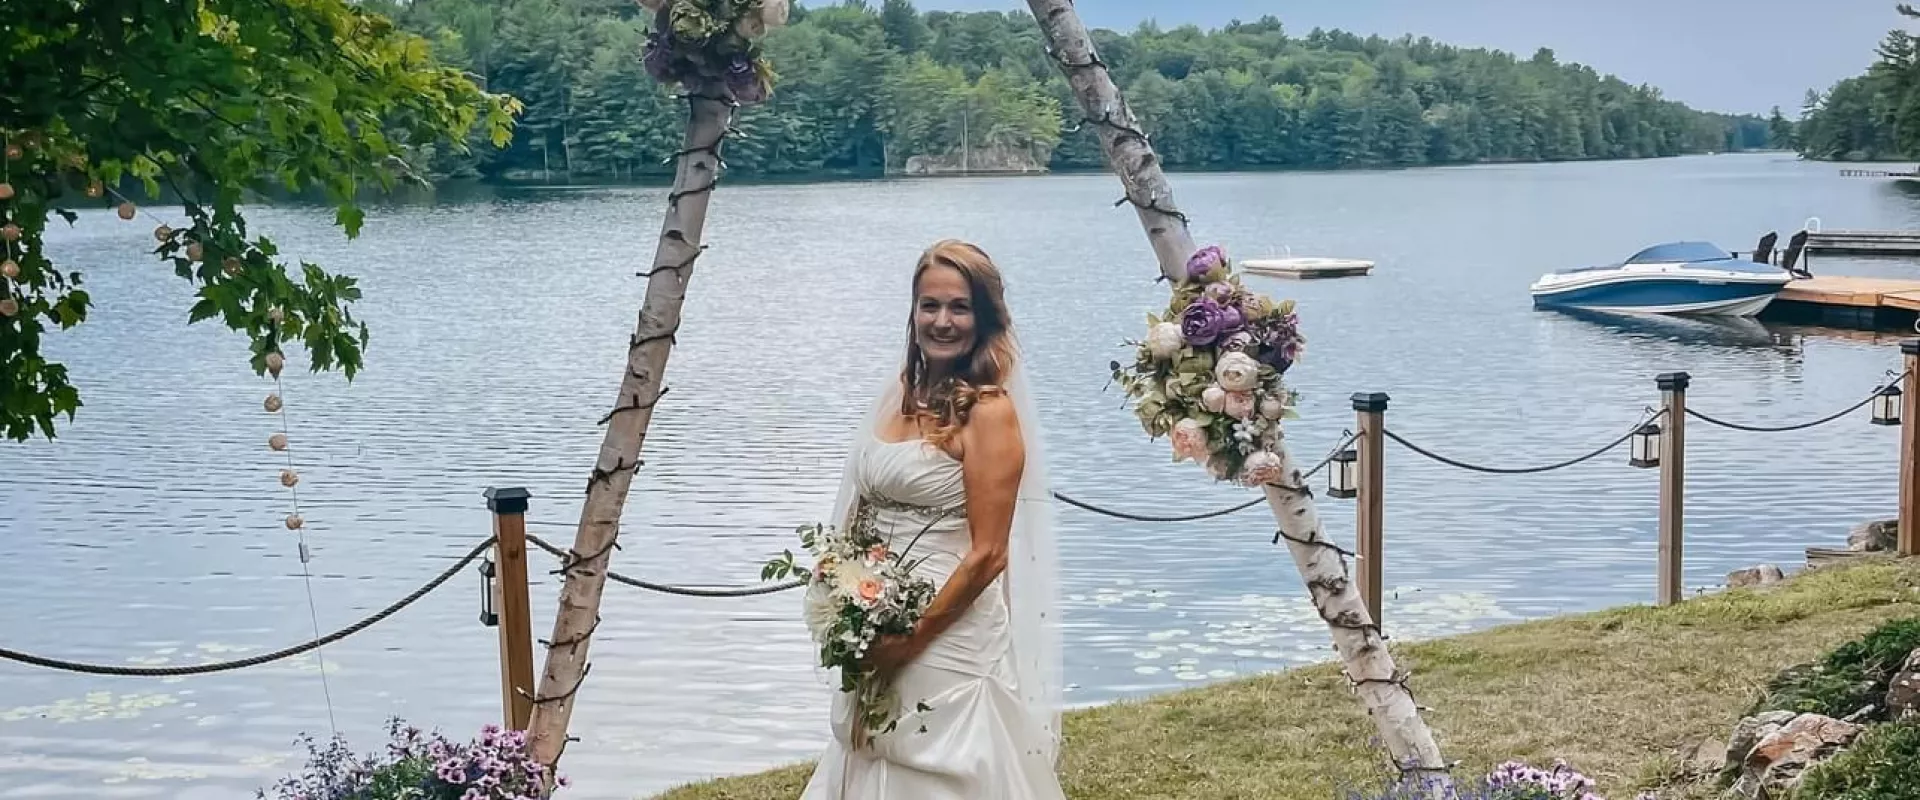 Grace Marcy Bayles, standing in front of a lake, wearing her wedding dress on her wedding day.